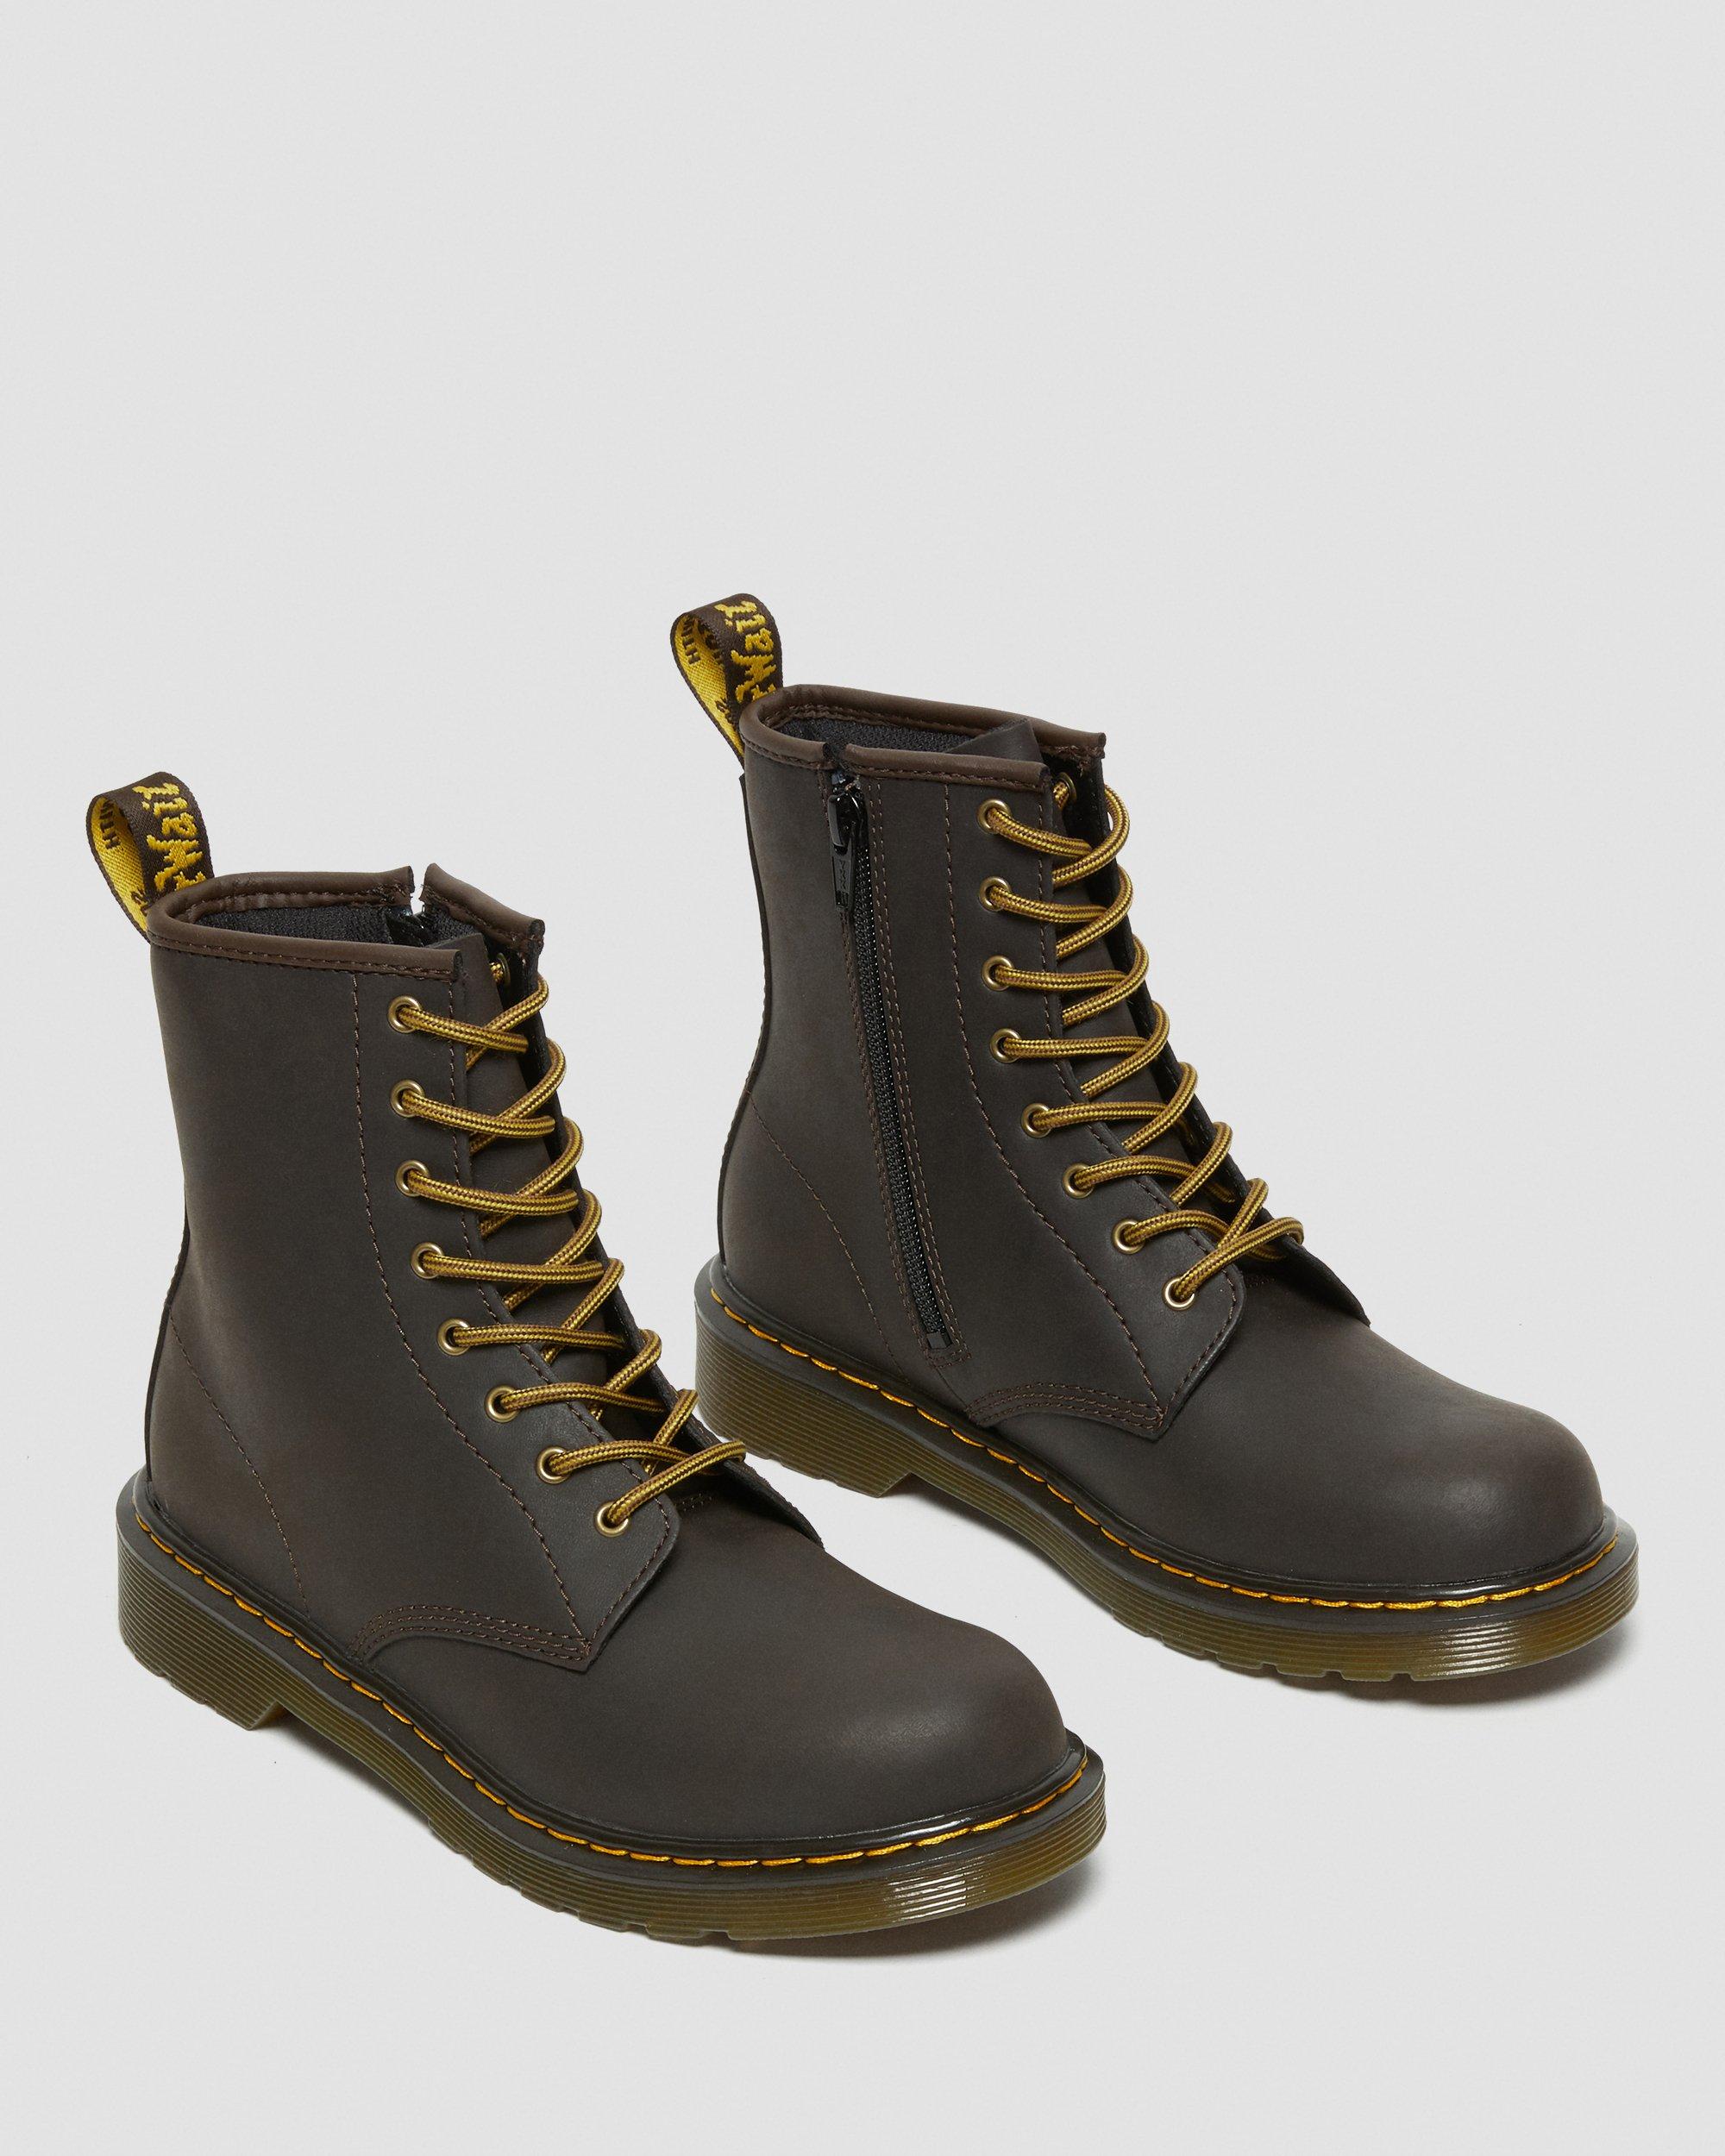 Leather Boots with Laces & Zip, for Boys Brown Dark Solid